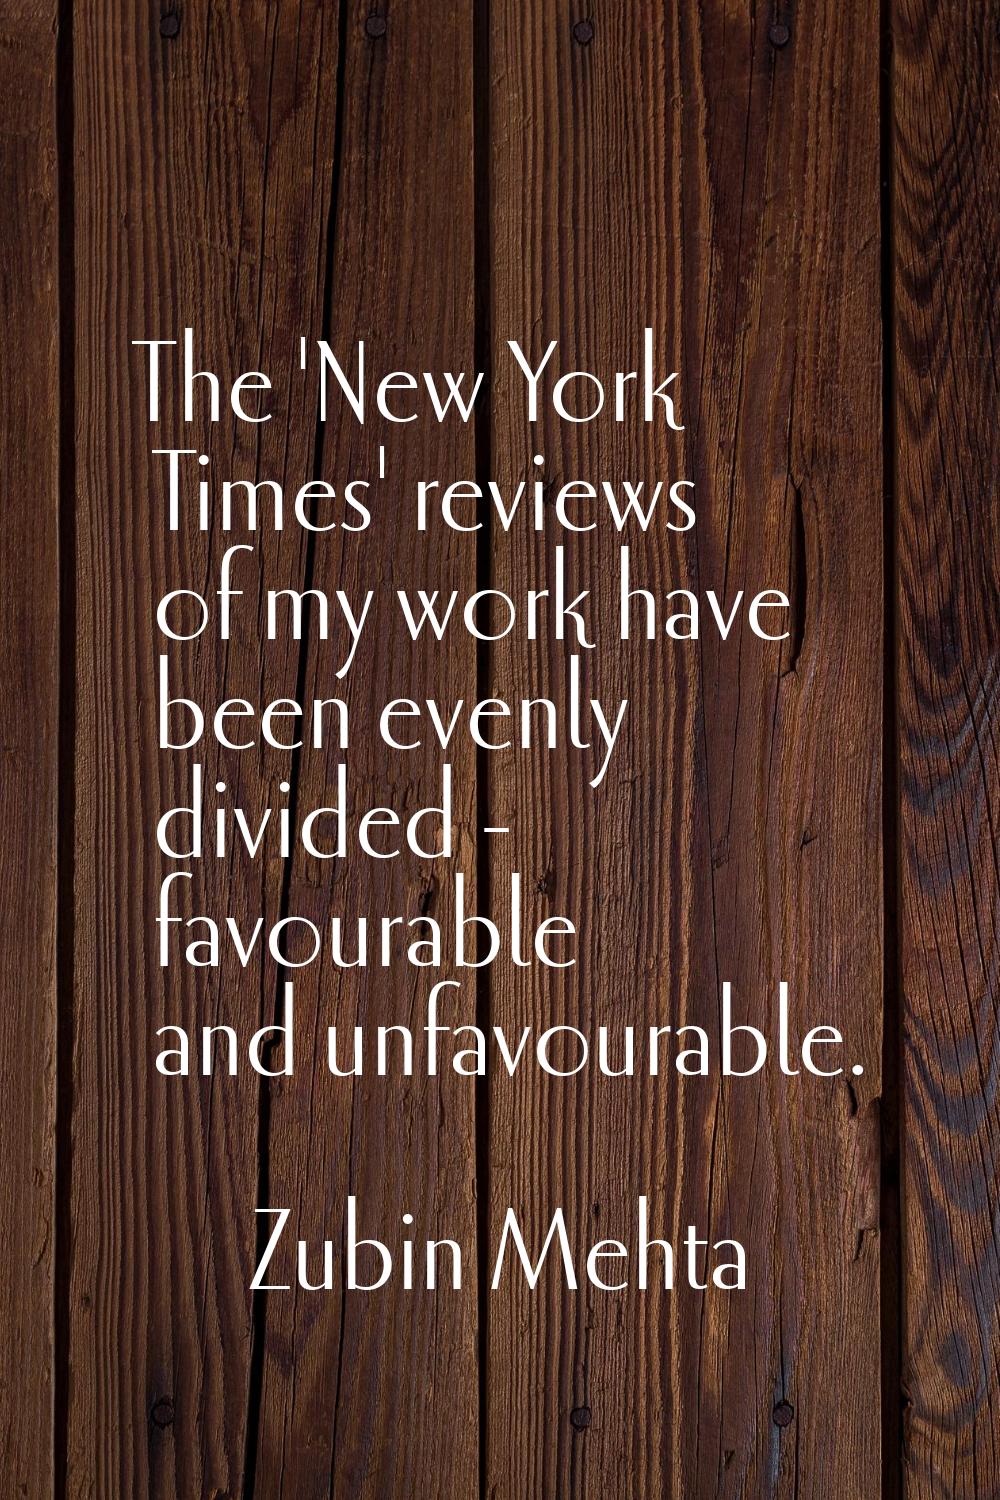 The 'New York Times' reviews of my work have been evenly divided - favourable and unfavourable.